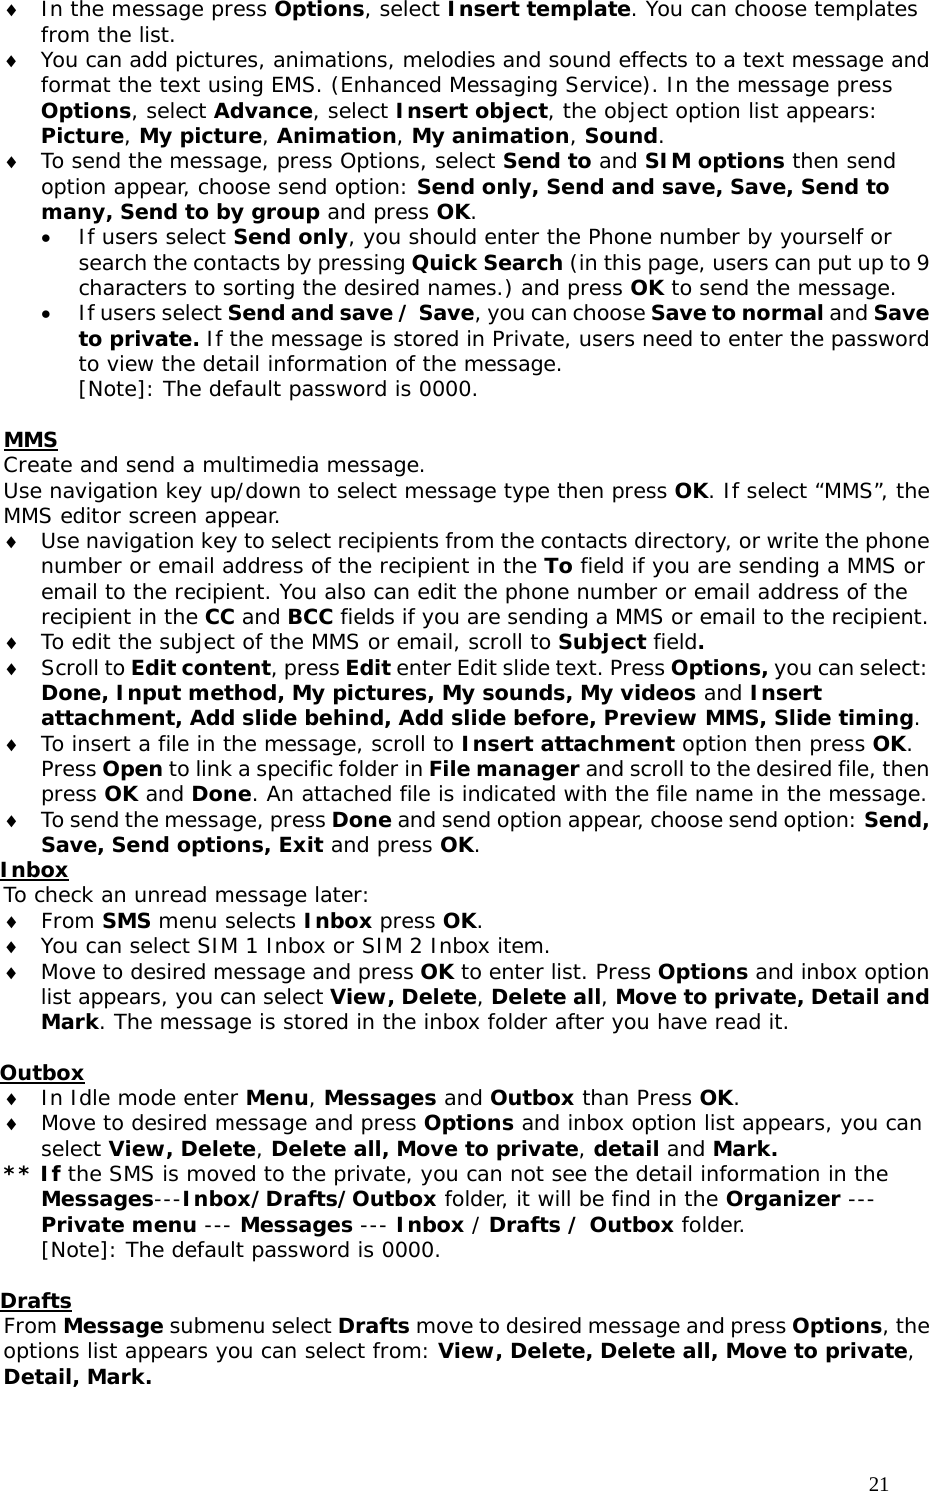                                     21 ♦ In the message press Options, select Insert template. You can choose templates from the list. ♦ You can add pictures, animations, melodies and sound effects to a text message and format the text using EMS. (Enhanced Messaging Service). In the message press Options, select Advance, select Insert object, the object option list appears: Picture, My picture, Animation, My animation, Sound. ♦ To send the message, press Options, select Send to and SIM options then send option appear, choose send option: Send only, Send and save, Save, Send to many, Send to by group and press OK.  • If users select Send only, you should enter the Phone number by yourself or search the contacts by pressing Quick Search (in this page, users can put up to 9 characters to sorting the desired names.) and press OK to send the message. • If users select Send and save / Save, you can choose Save to normal and Save to private. If the message is stored in Private, users need to enter the password to view the detail information of the message. [Note]: The default password is 0000.  MMS  Create and send a multimedia message. Use navigation key up/down to select message type then press OK. If select “MMS”, the MMS editor screen appear. ♦ Use navigation key to select recipients from the contacts directory, or write the phone number or email address of the recipient in the To field if you are sending a MMS or email to the recipient. You also can edit the phone number or email address of the recipient in the CC and BCC fields if you are sending a MMS or email to the recipient.  ♦ To edit the subject of the MMS or email, scroll to Subject field. ♦ Scroll to Edit content, press Edit enter Edit slide text. Press Options, you can select: Done, Input method, My pictures, My sounds, My videos and Insert attachment, Add slide behind, Add slide before, Preview MMS, Slide timing. ♦ To insert a file in the message, scroll to Insert attachment option then press OK. Press Open to link a specific folder in File manager and scroll to the desired file, then press OK and Done. An attached file is indicated with the file name in the message. ♦ To send the message, press Done and send option appear, choose send option: Send, Save, Send options, Exit and press OK.  Inbox To check an unread message later: ♦ From SMS menu selects Inbox press OK.  ♦ You can select SIM 1 Inbox or SIM 2 Inbox item. ♦ Move to desired message and press OK to enter list. Press Options and inbox option list appears, you can select View, Delete, Delete all, Move to private, Detail and Mark. The message is stored in the inbox folder after you have read it.   Outbox ♦ In Idle mode enter Menu, Messages and Outbox than Press OK. ♦ Move to desired message and press Options and inbox option list appears, you can select View, Delete, Delete all, Move to private, detail and Mark. ** If the SMS is moved to the private, you can not see the detail information in the Messages---Inbox/Drafts/Outbox folder, it will be find in the Organizer --- Private menu --- Messages --- Inbox / Drafts / Outbox folder. [Note]: The default password is 0000.  Drafts From Message submenu select Drafts move to desired message and press Options, the options list appears you can select from: View, Delete, Delete all, Move to private, Detail, Mark.   